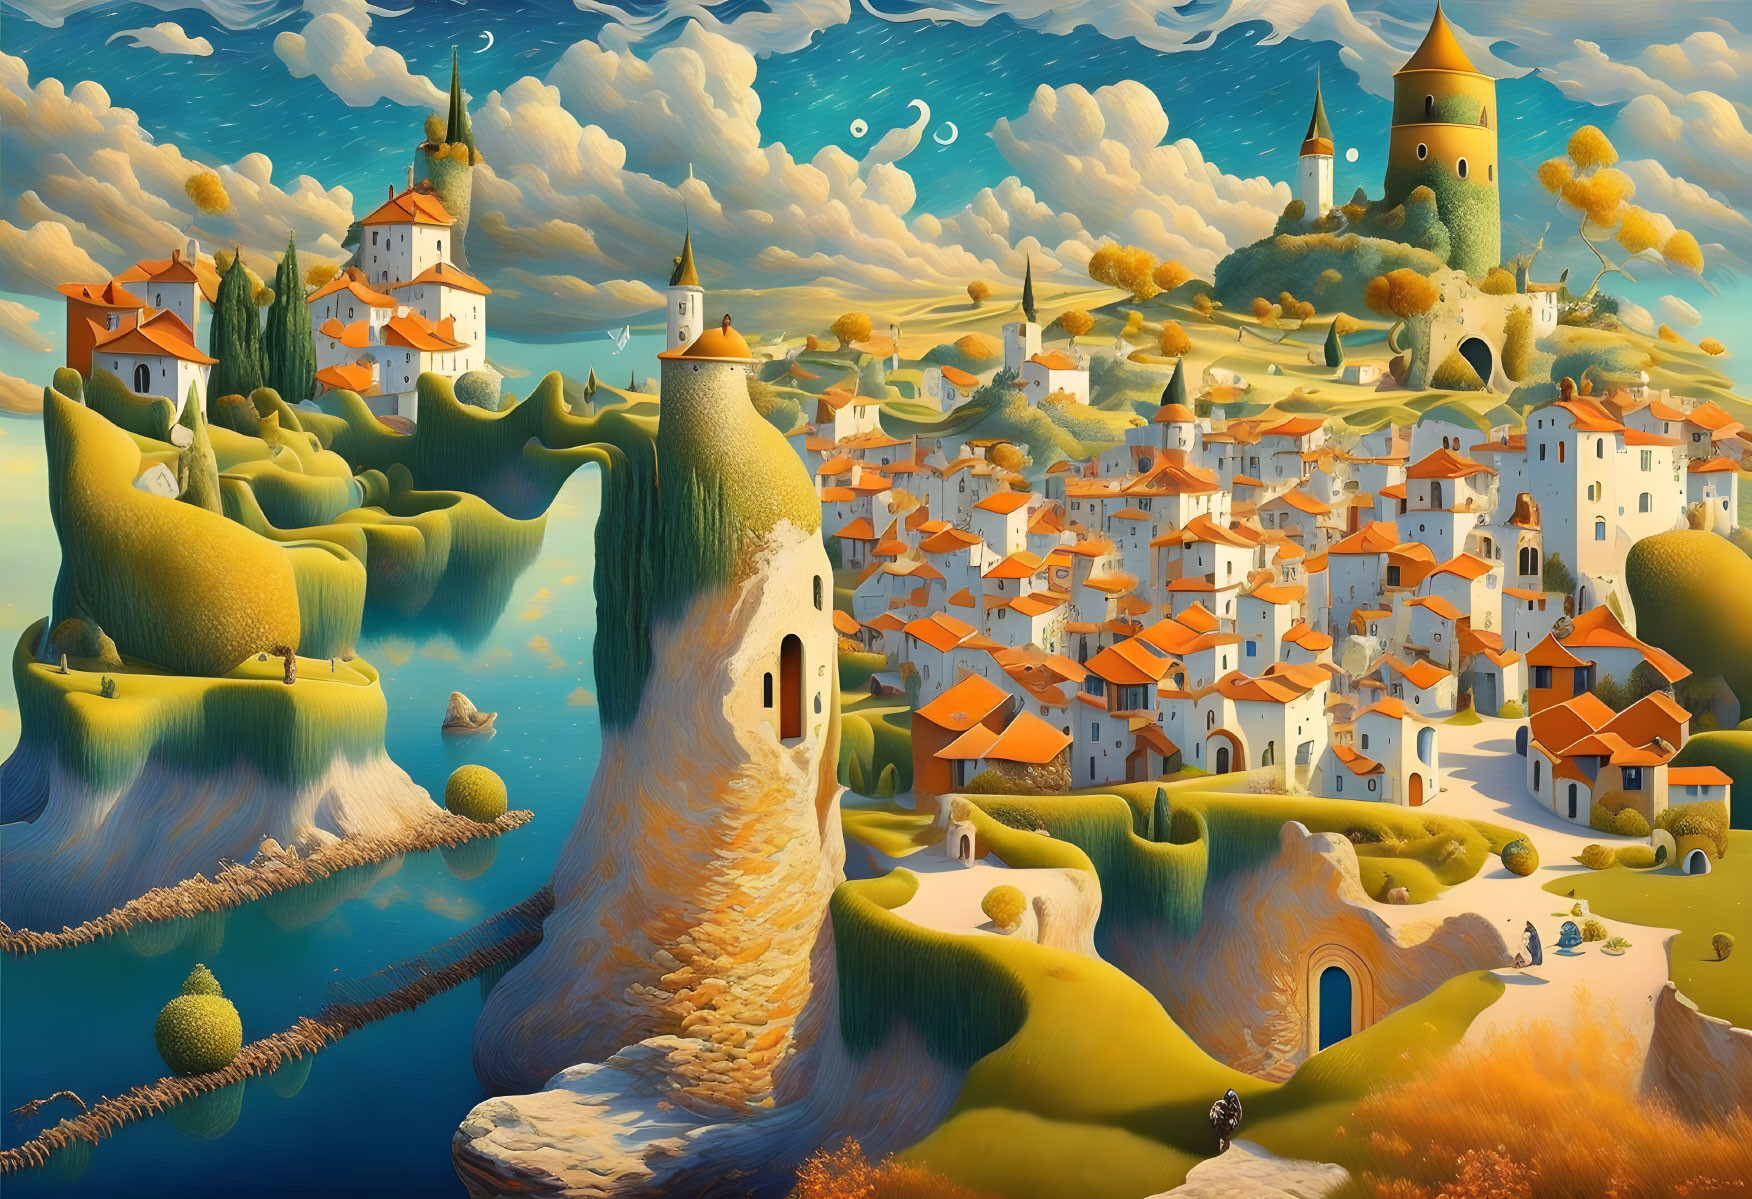 Colorful surreal landscape with whimsical hills, houses, and castles under dynamic sky